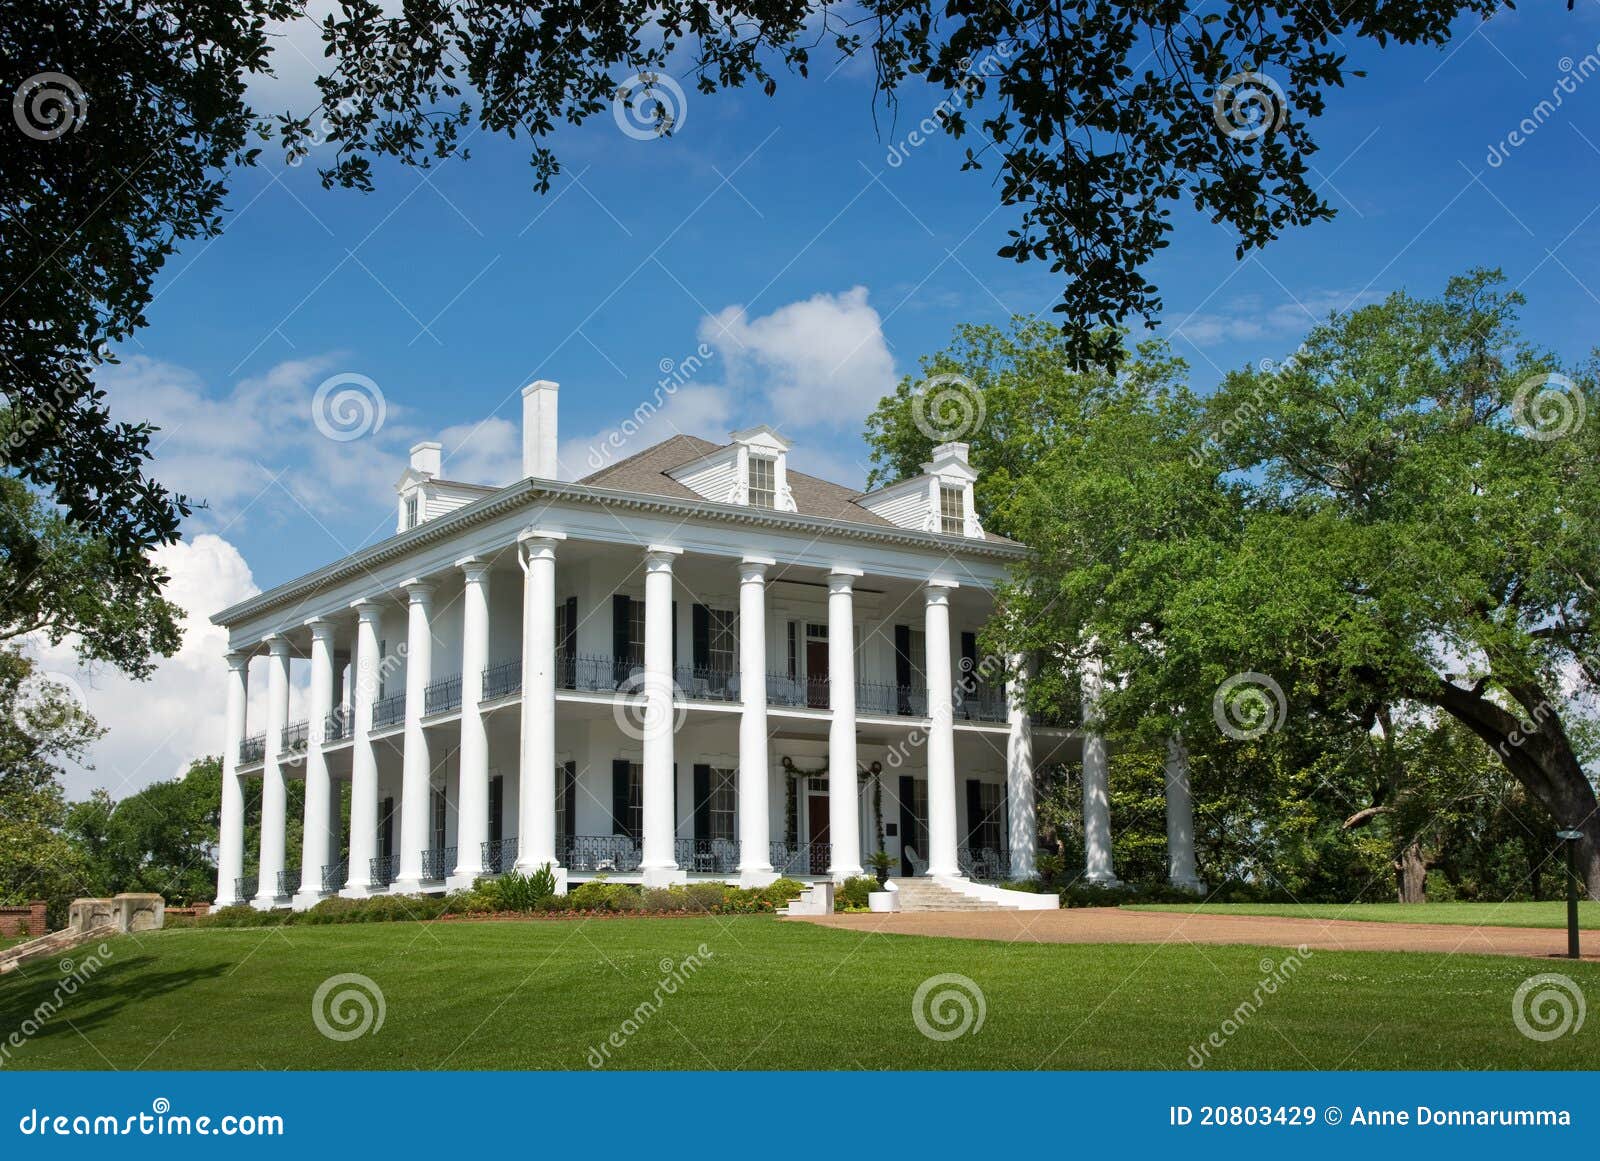 dunleith southern mansion